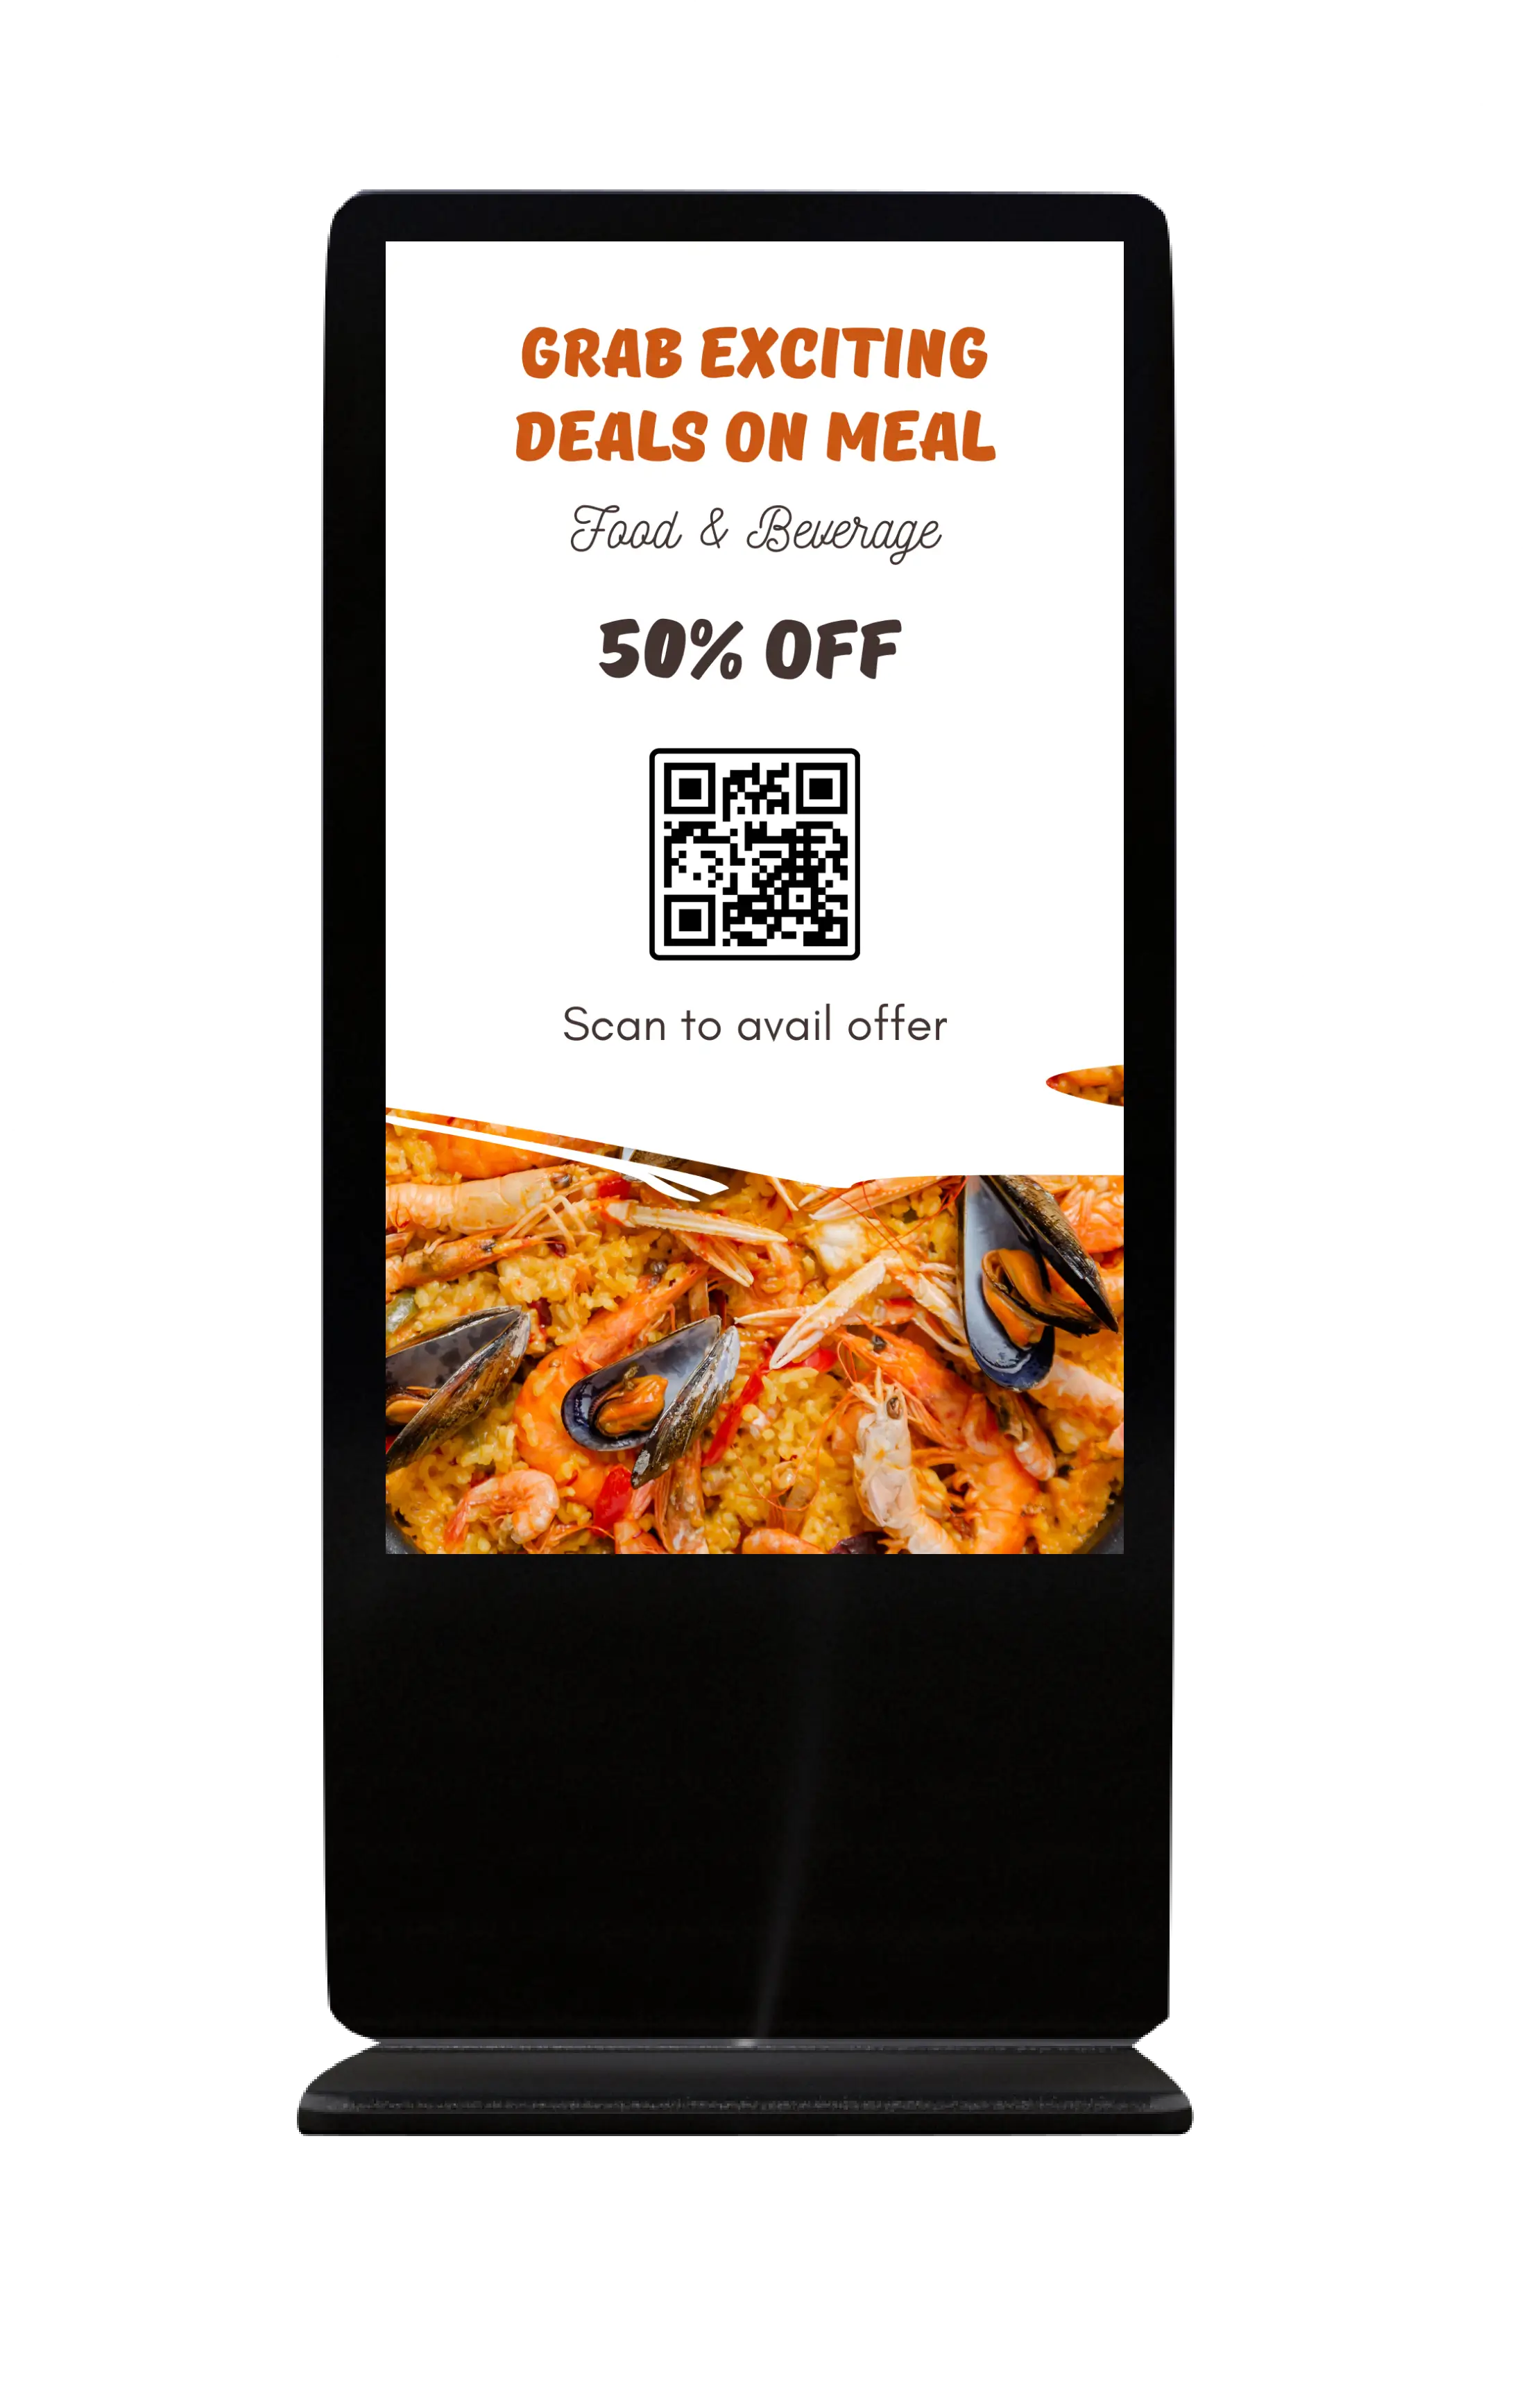 A Interactive digital standee powered by Pickcel Digital Signage software displaying meal offer content